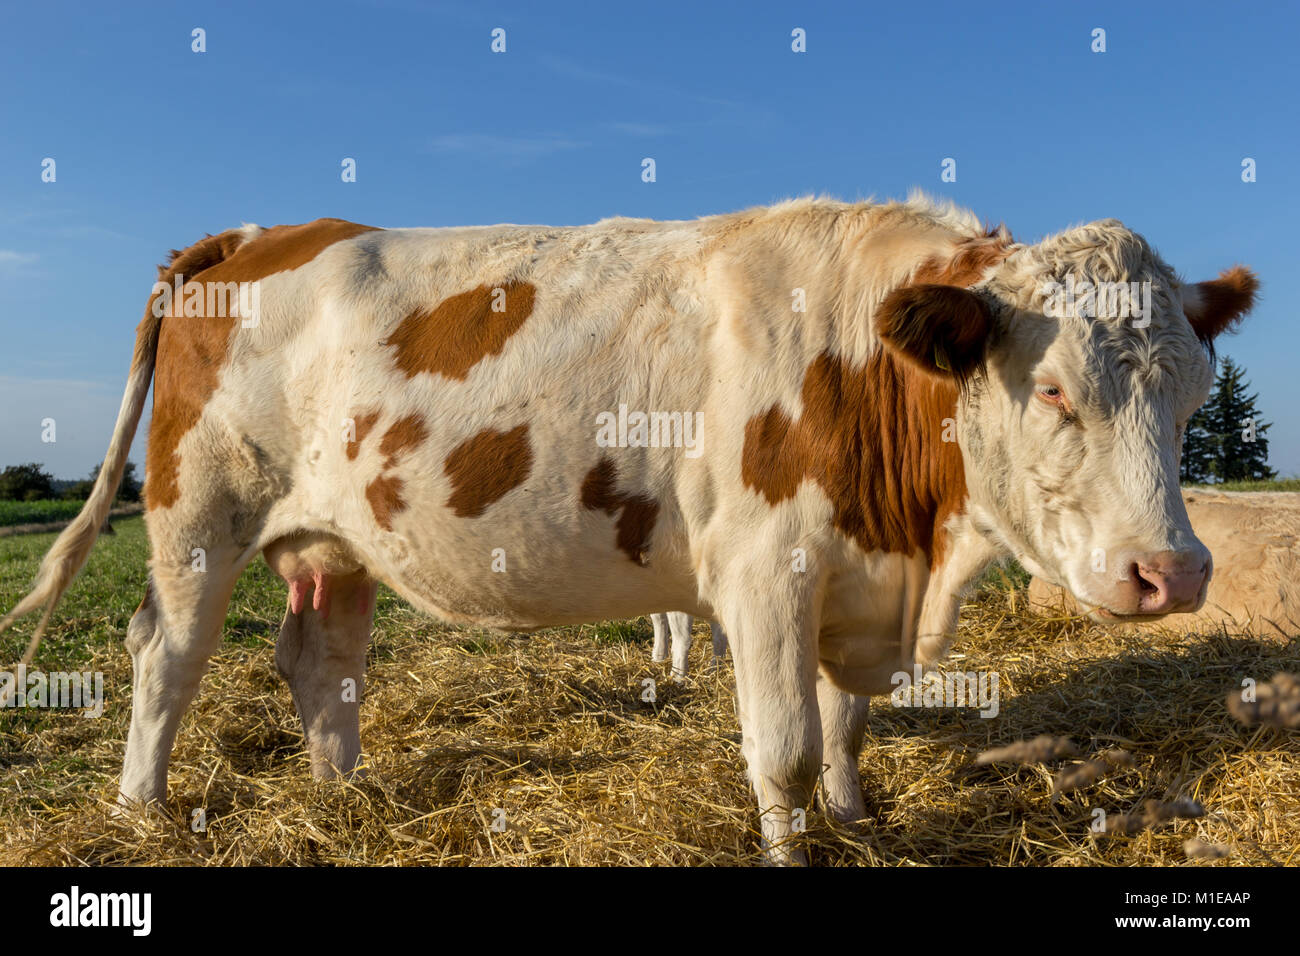 Cow, white and brown; Fur, Denmark Stock Photo